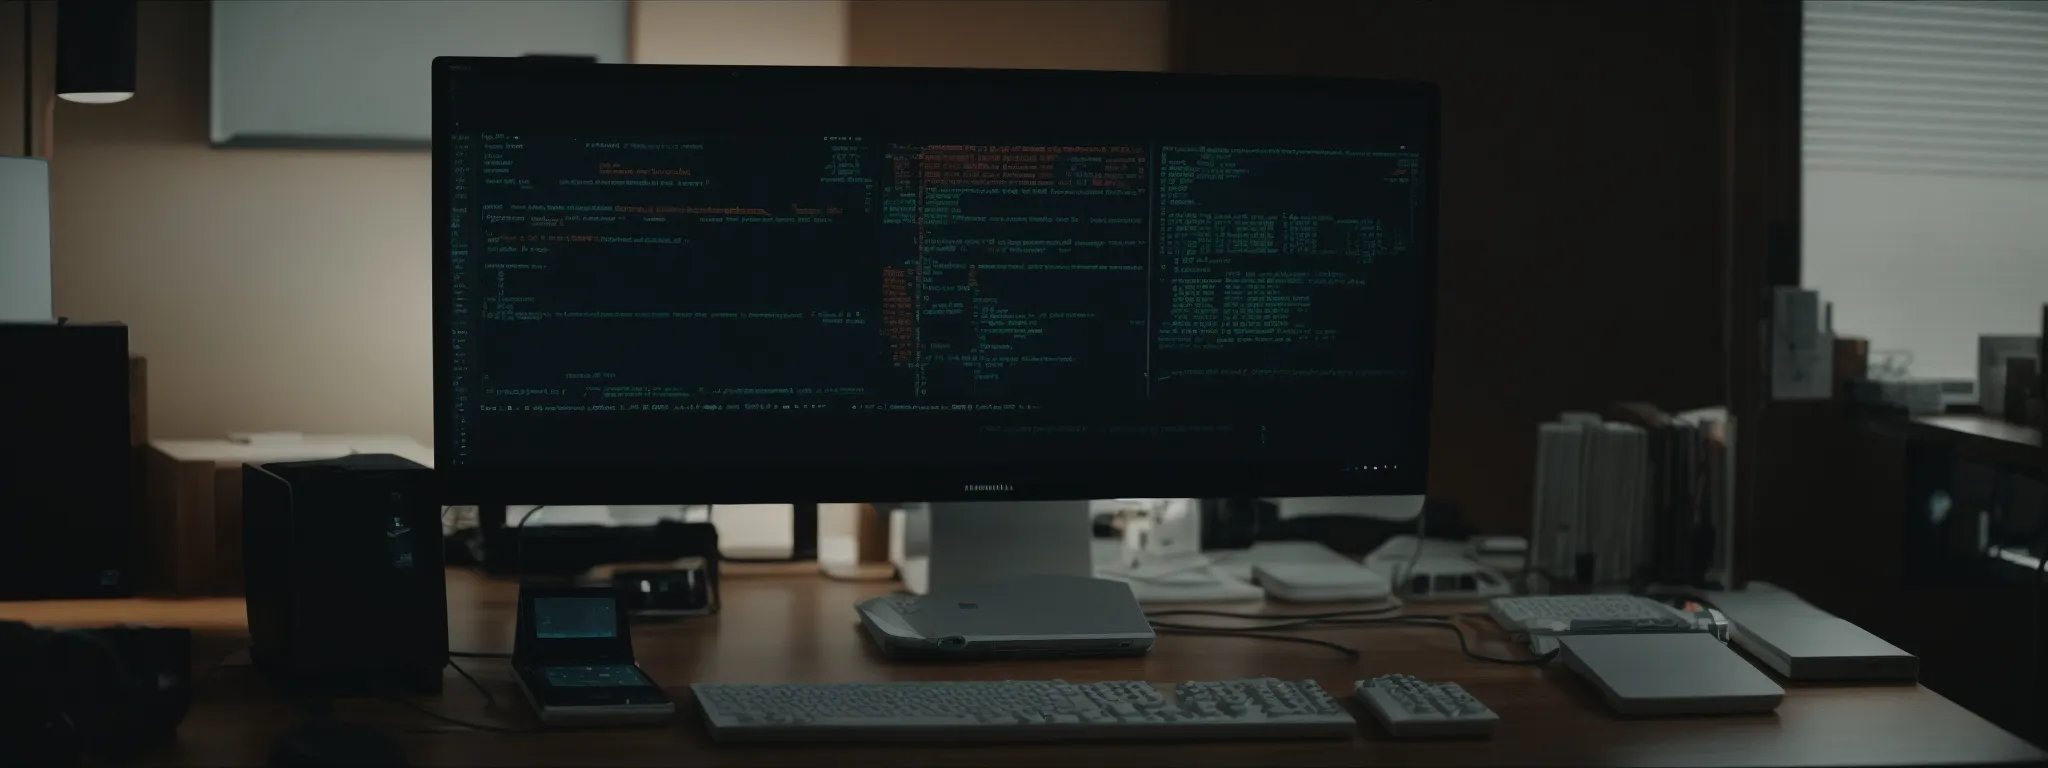 a computer screen displaying a terminal window with code and a keyboard set against an organized workspace.